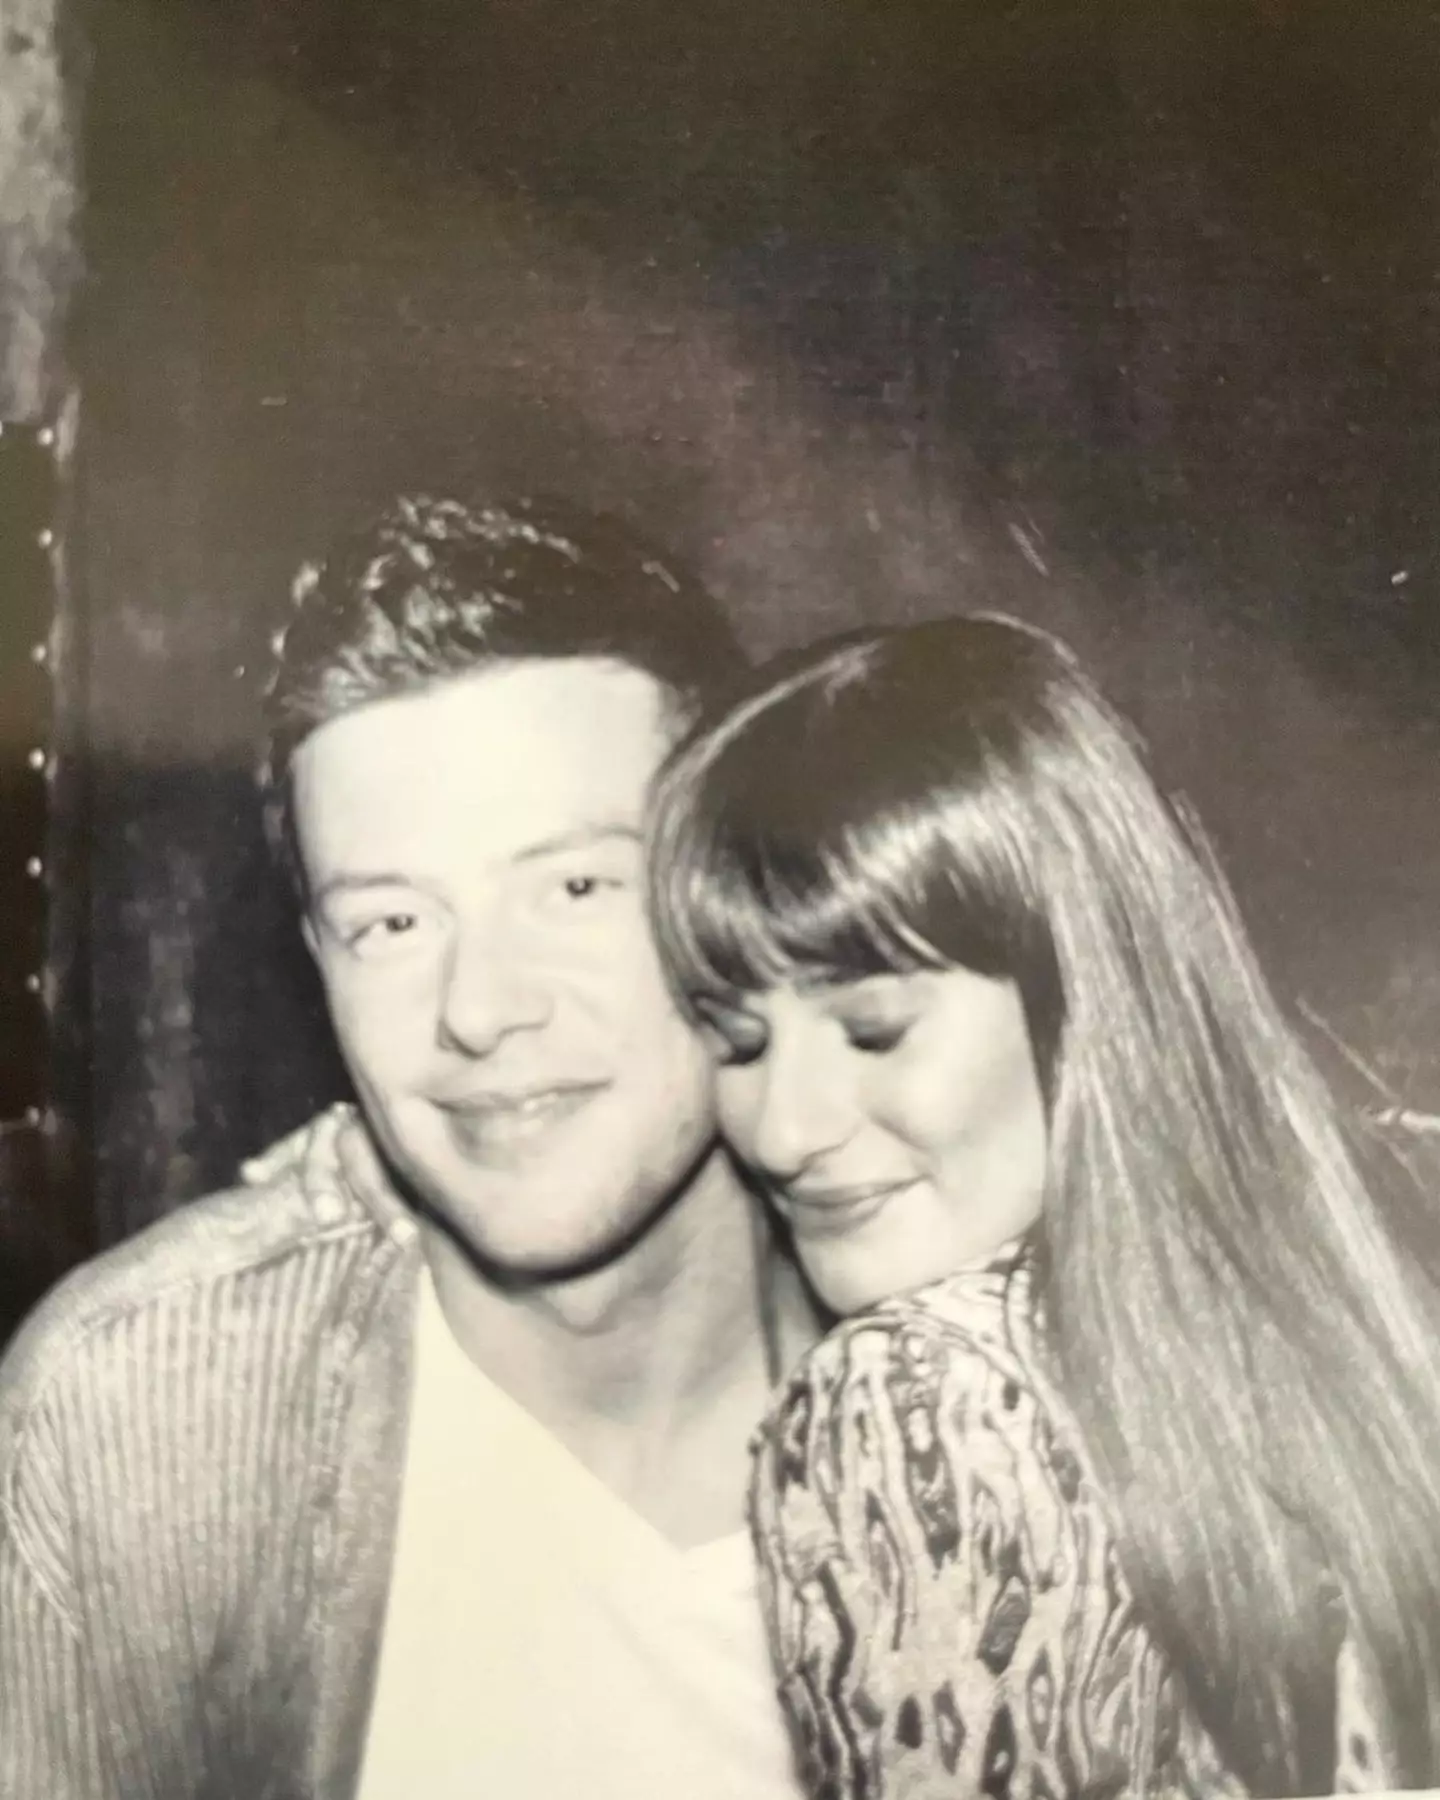 Michele shared an old snap of her and Cory Monteith with the emotional post.